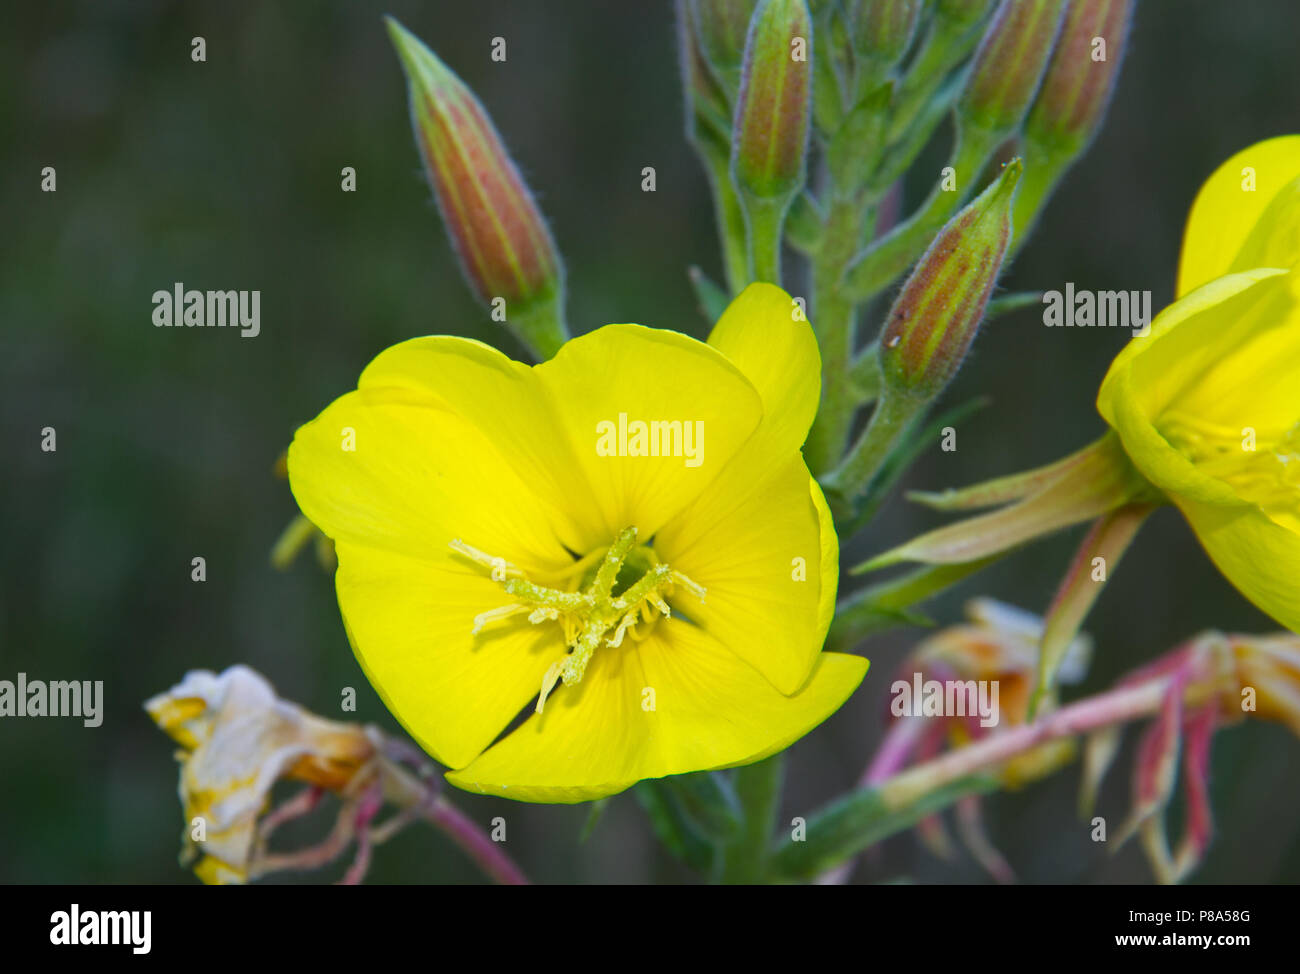 Close-up of the flower of Evening primrose, also known as Common evening-primrose and Evening star Stock Photo